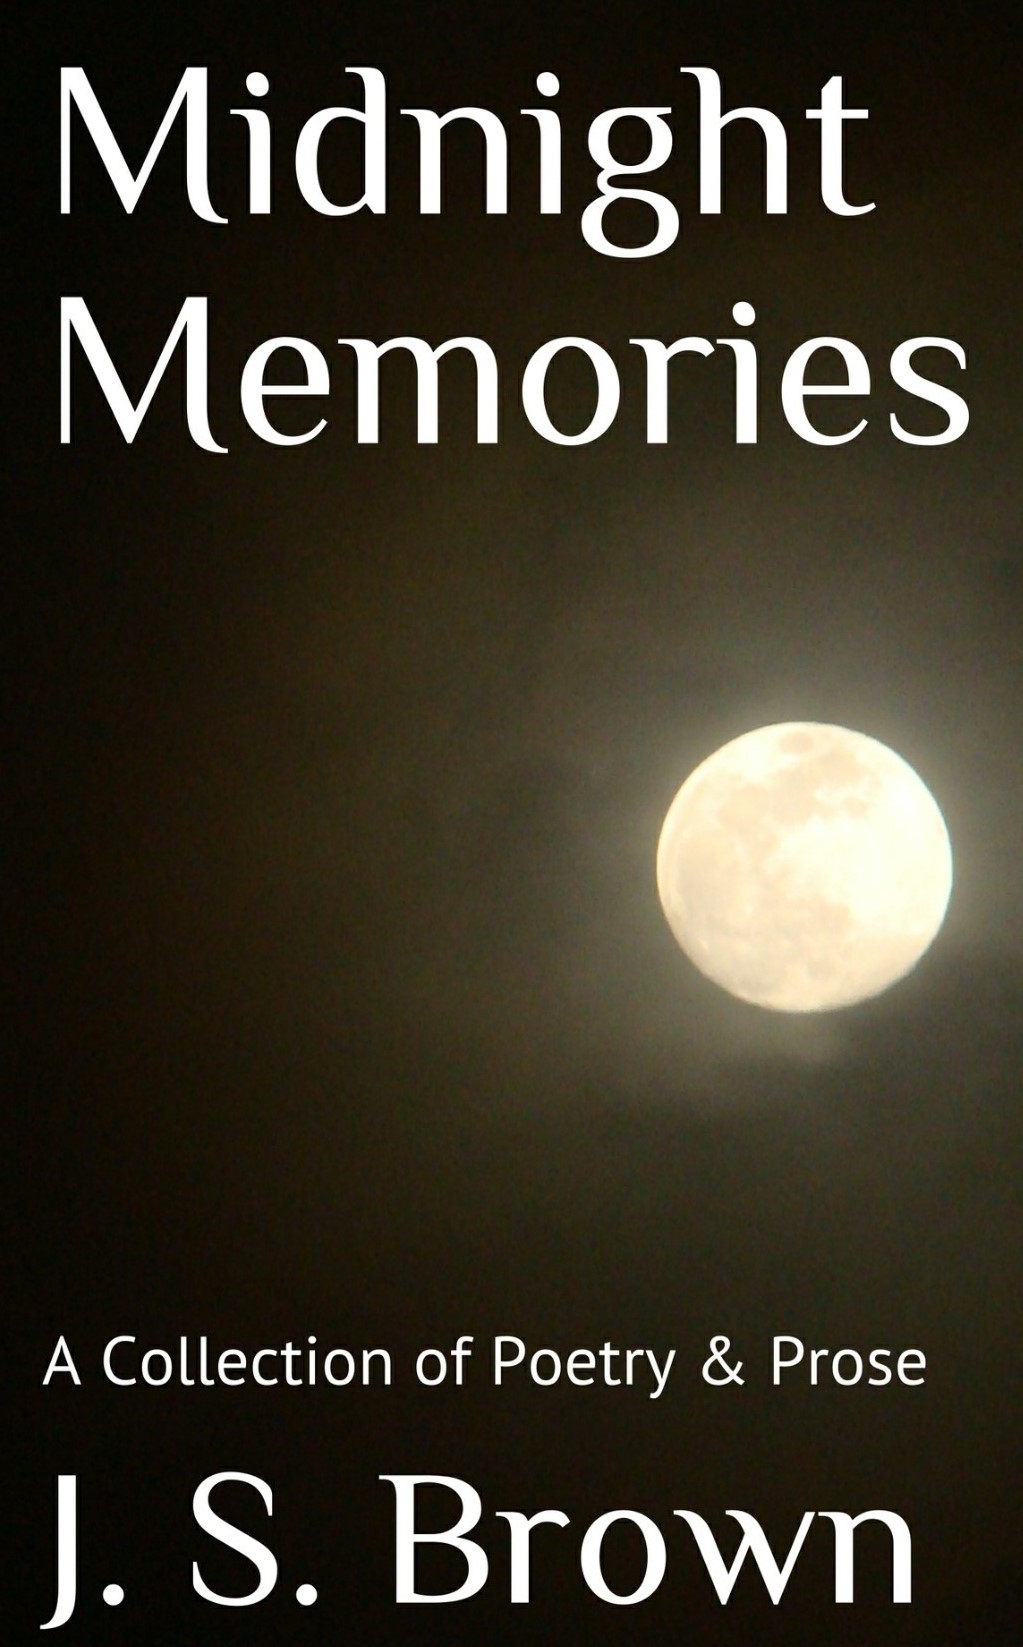 FREE: Midnight Memories: A Collection of Poetry & Prose by J. S. Brown